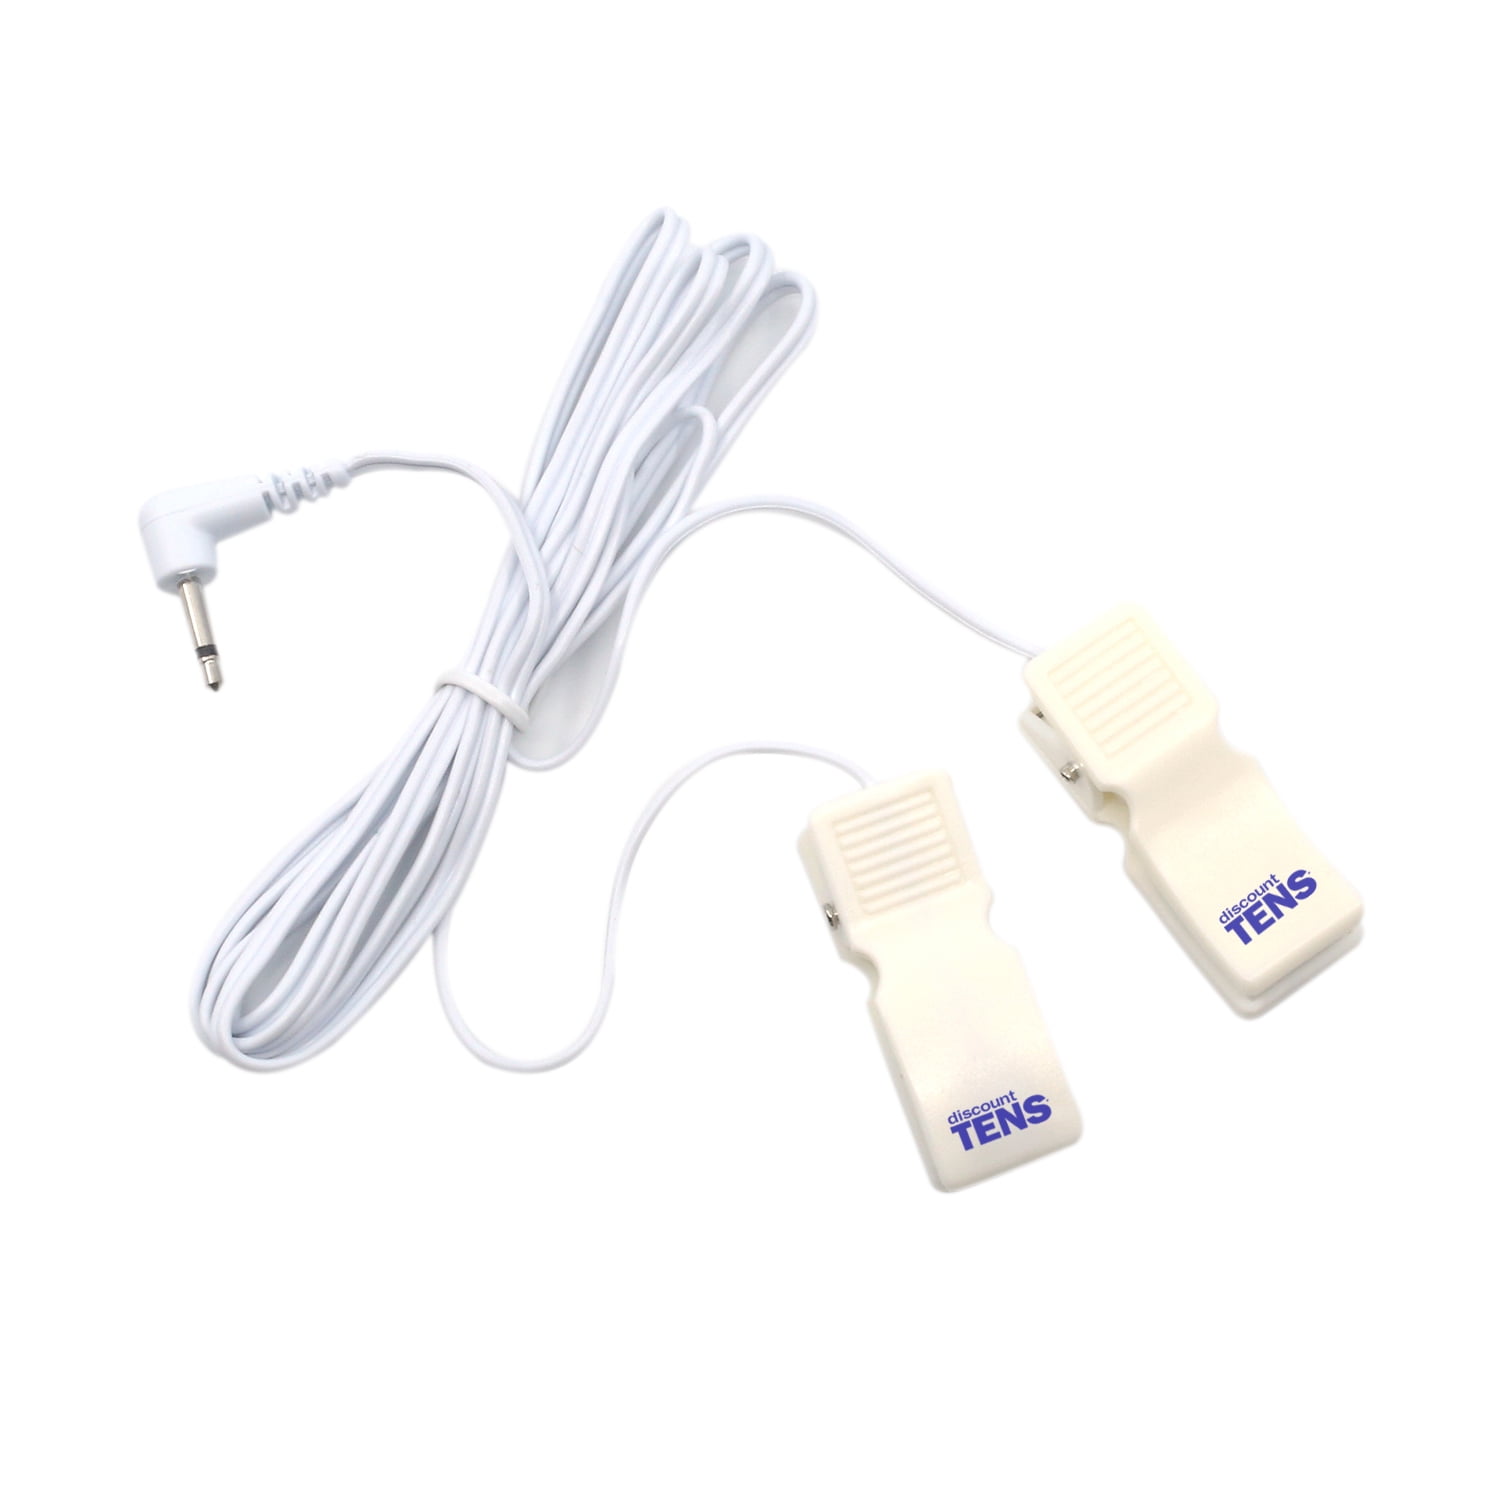  VeniCare 4pcs Replacement for Tens Unit Lead Wires for Intensity  10 Tens 2500 3000 EMS 7500 Twin Stim : Health & Household